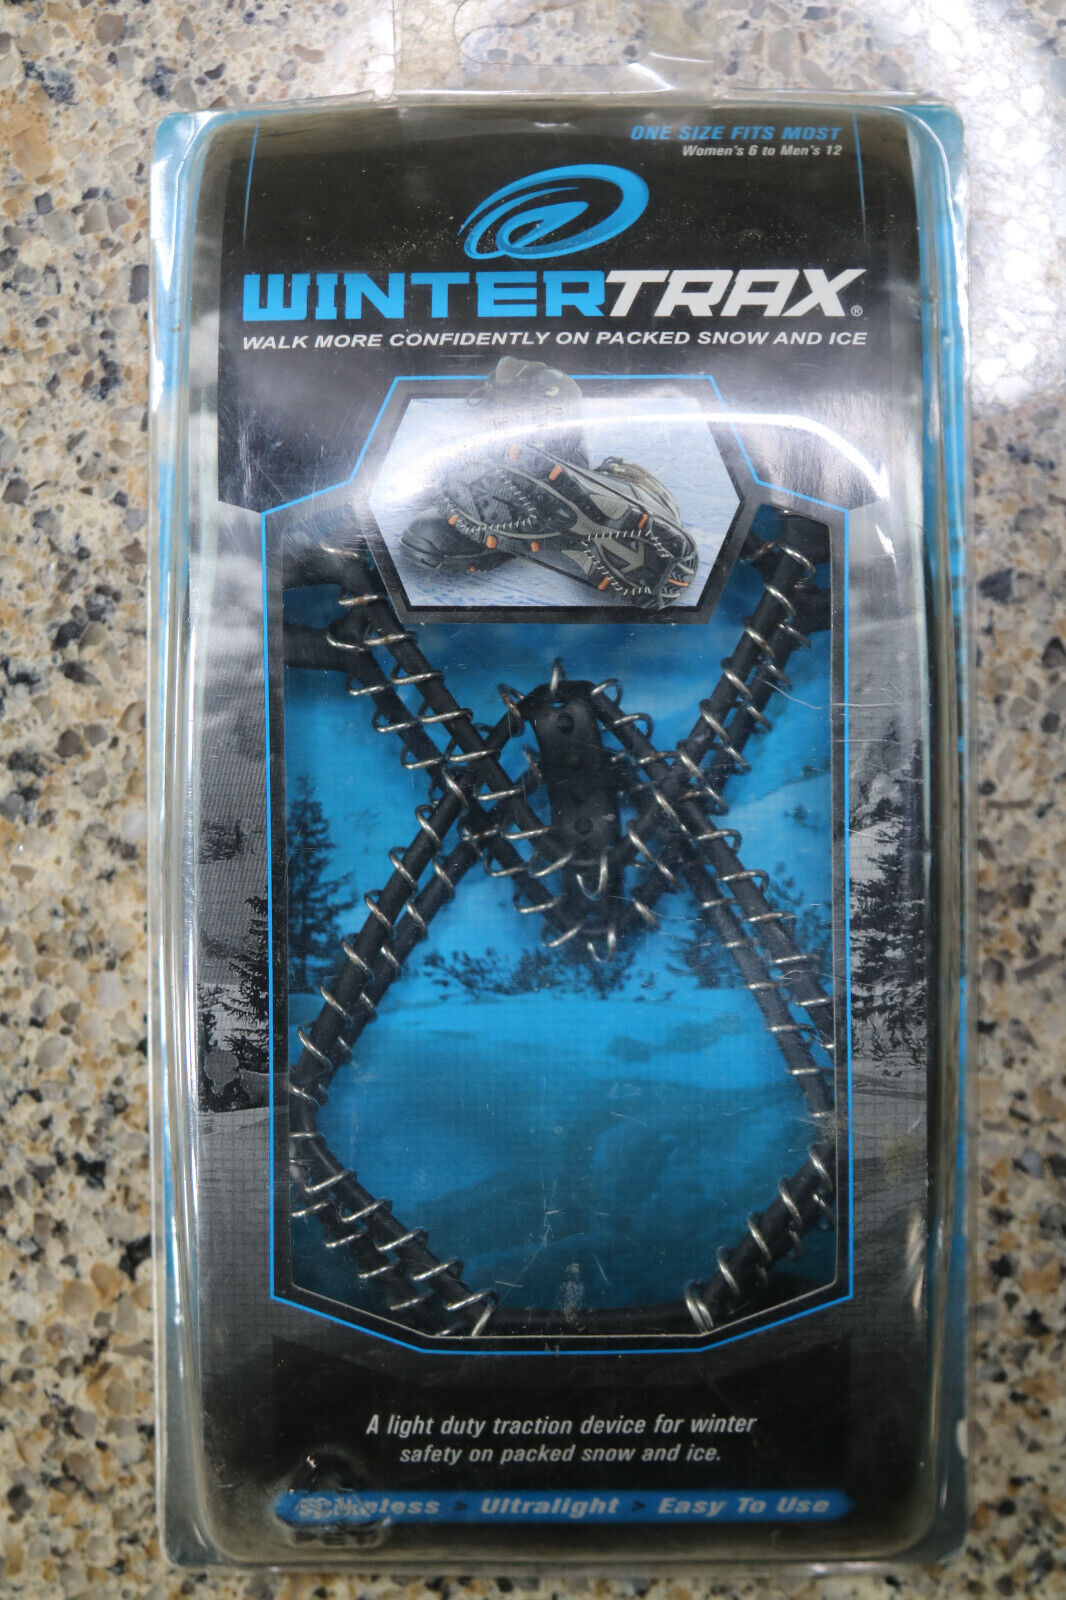 Wintertrax Snow/ice Traction Spikeless Lightweight Fits Womens 6 To Mens 12 Bnib